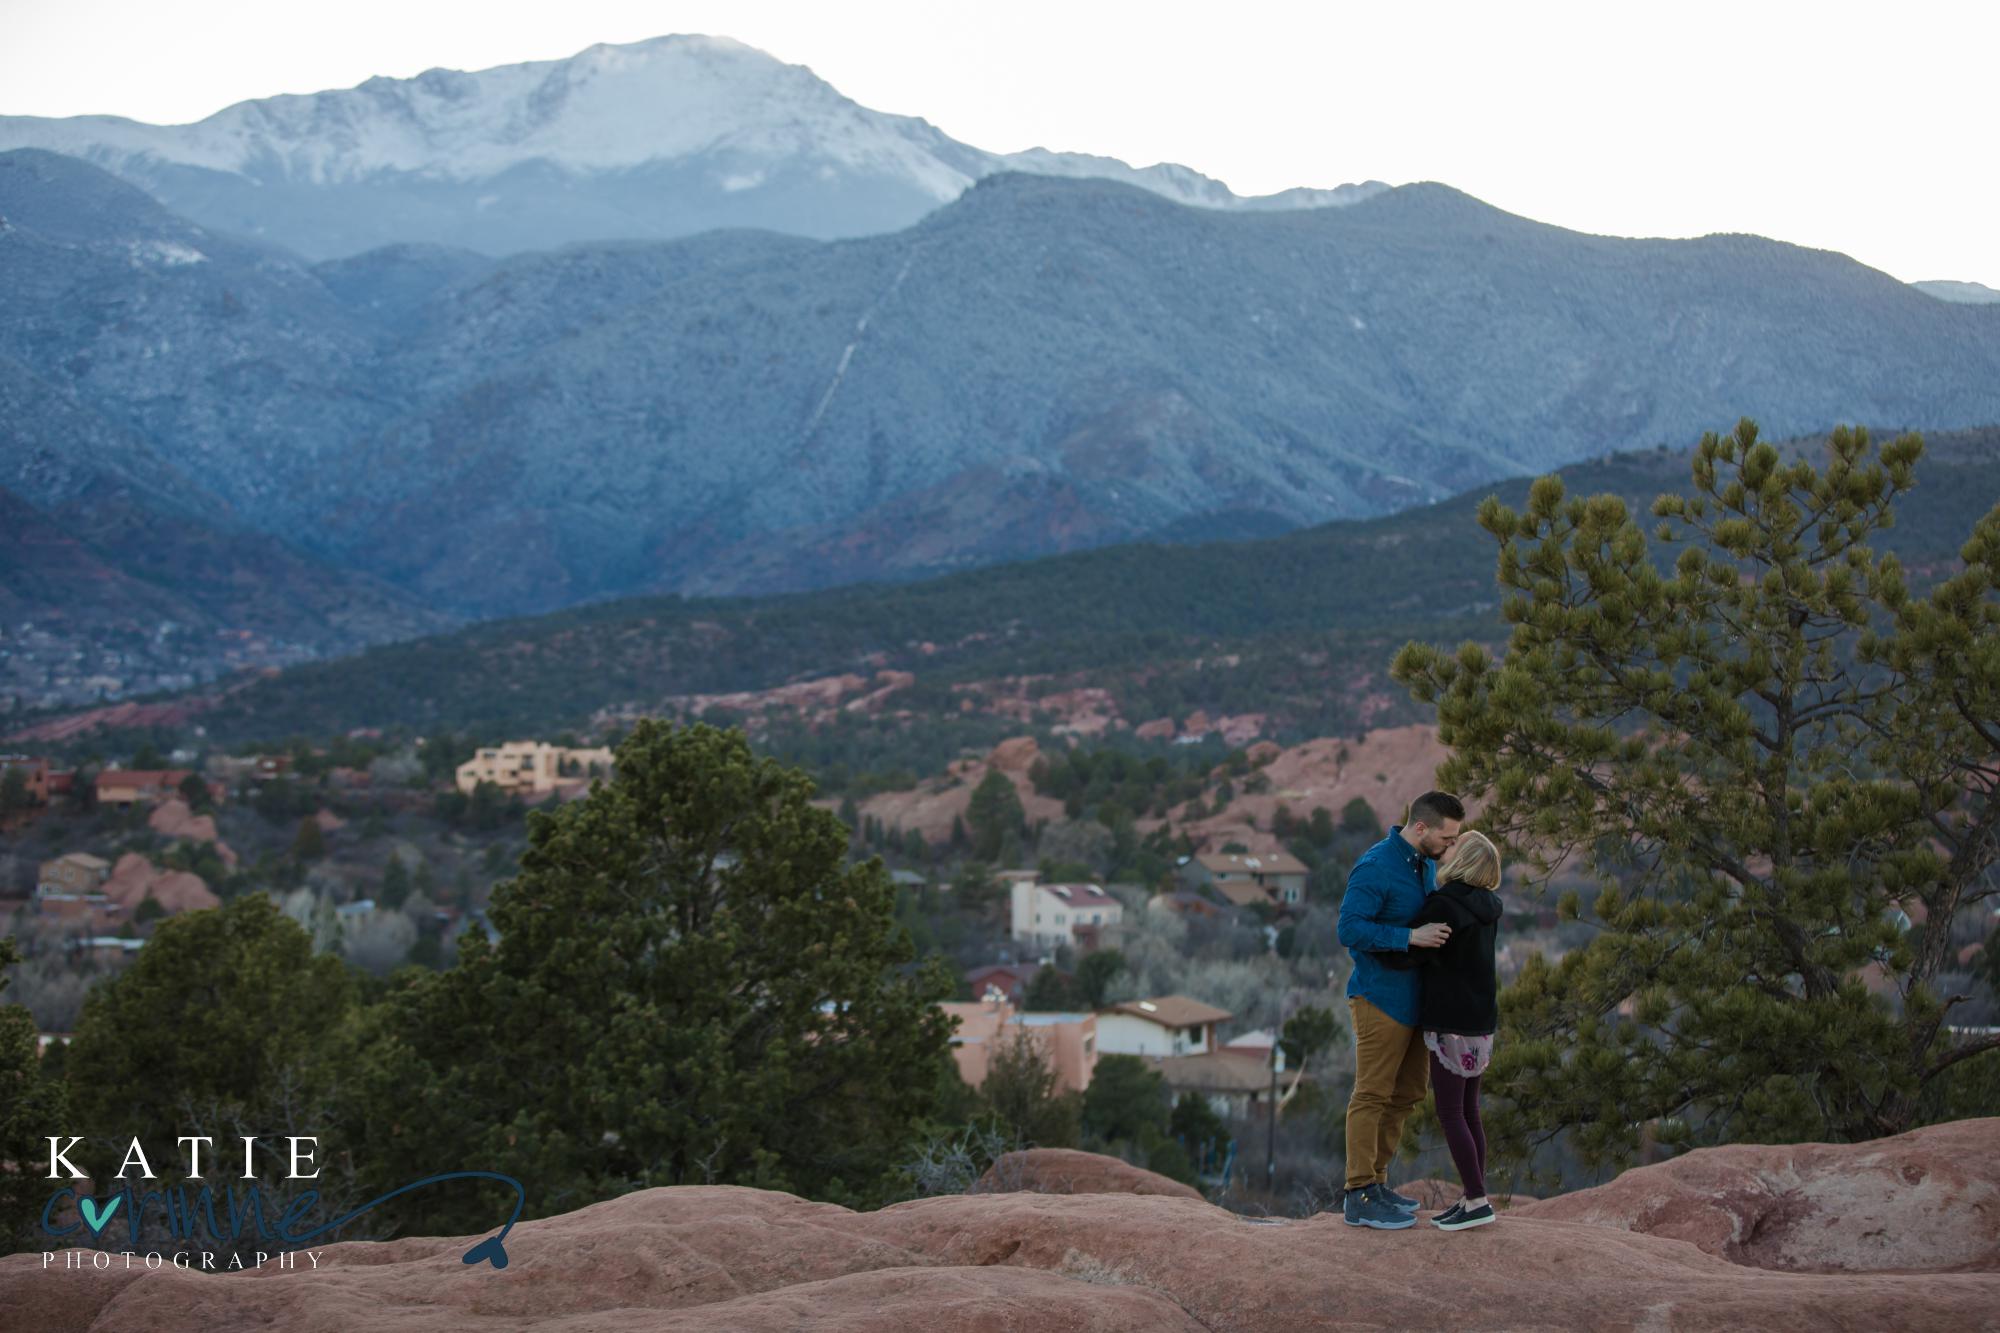 Colorado springs couple gets engaged on top of a mountain